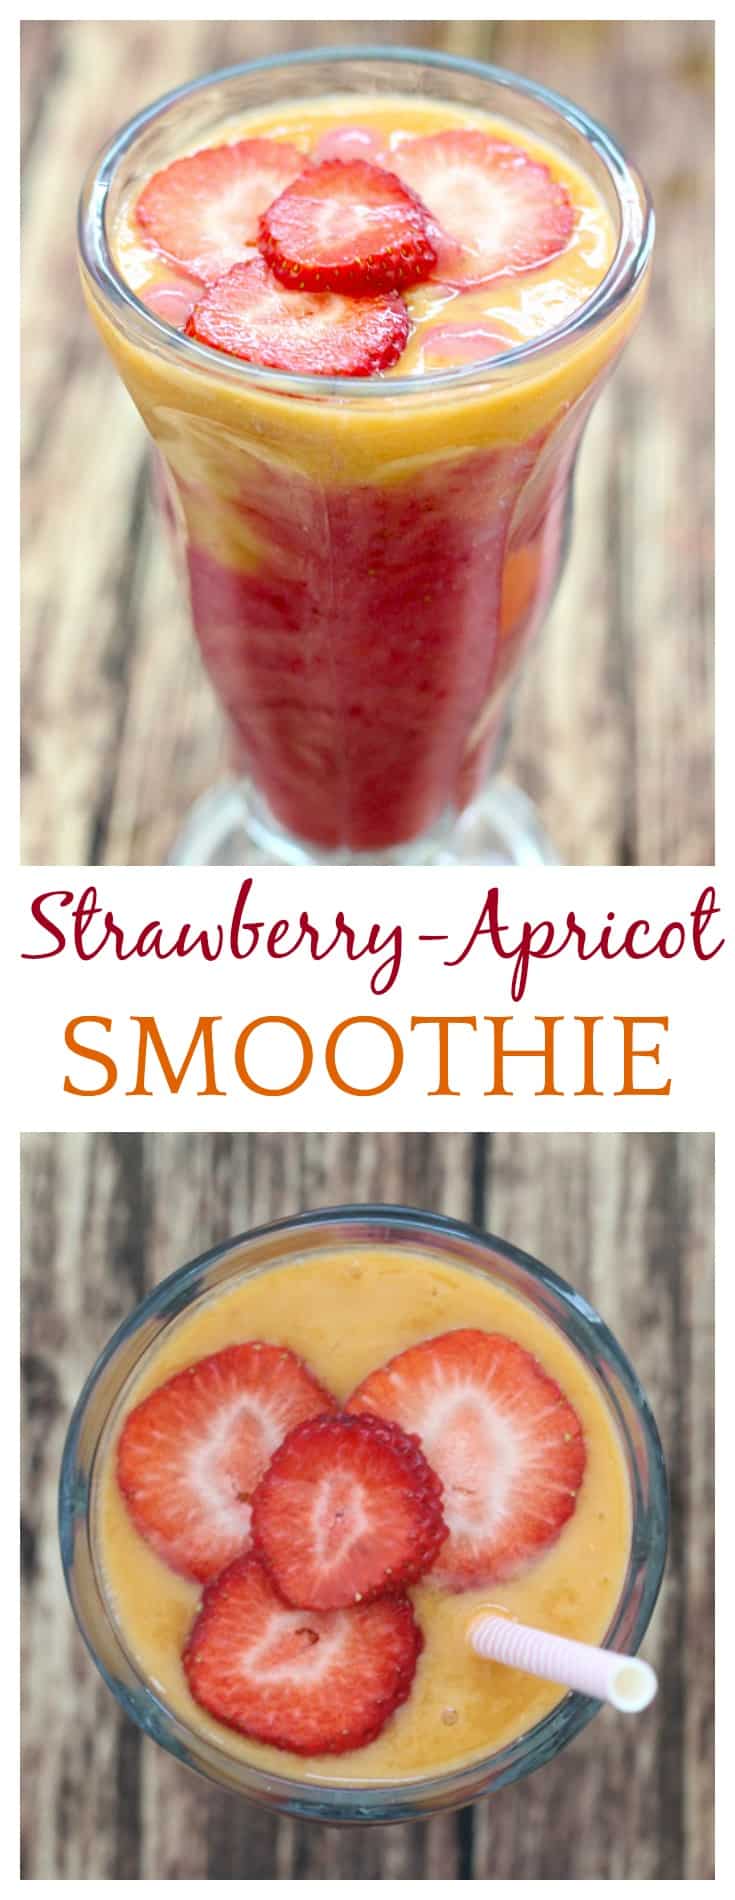 My current favorite way to enjoy fresh apricots is in this Summertime Strawberry-Apricot Smoothie! This recipe only takes about 5 minutes and is the perfect way to start a summer day! 